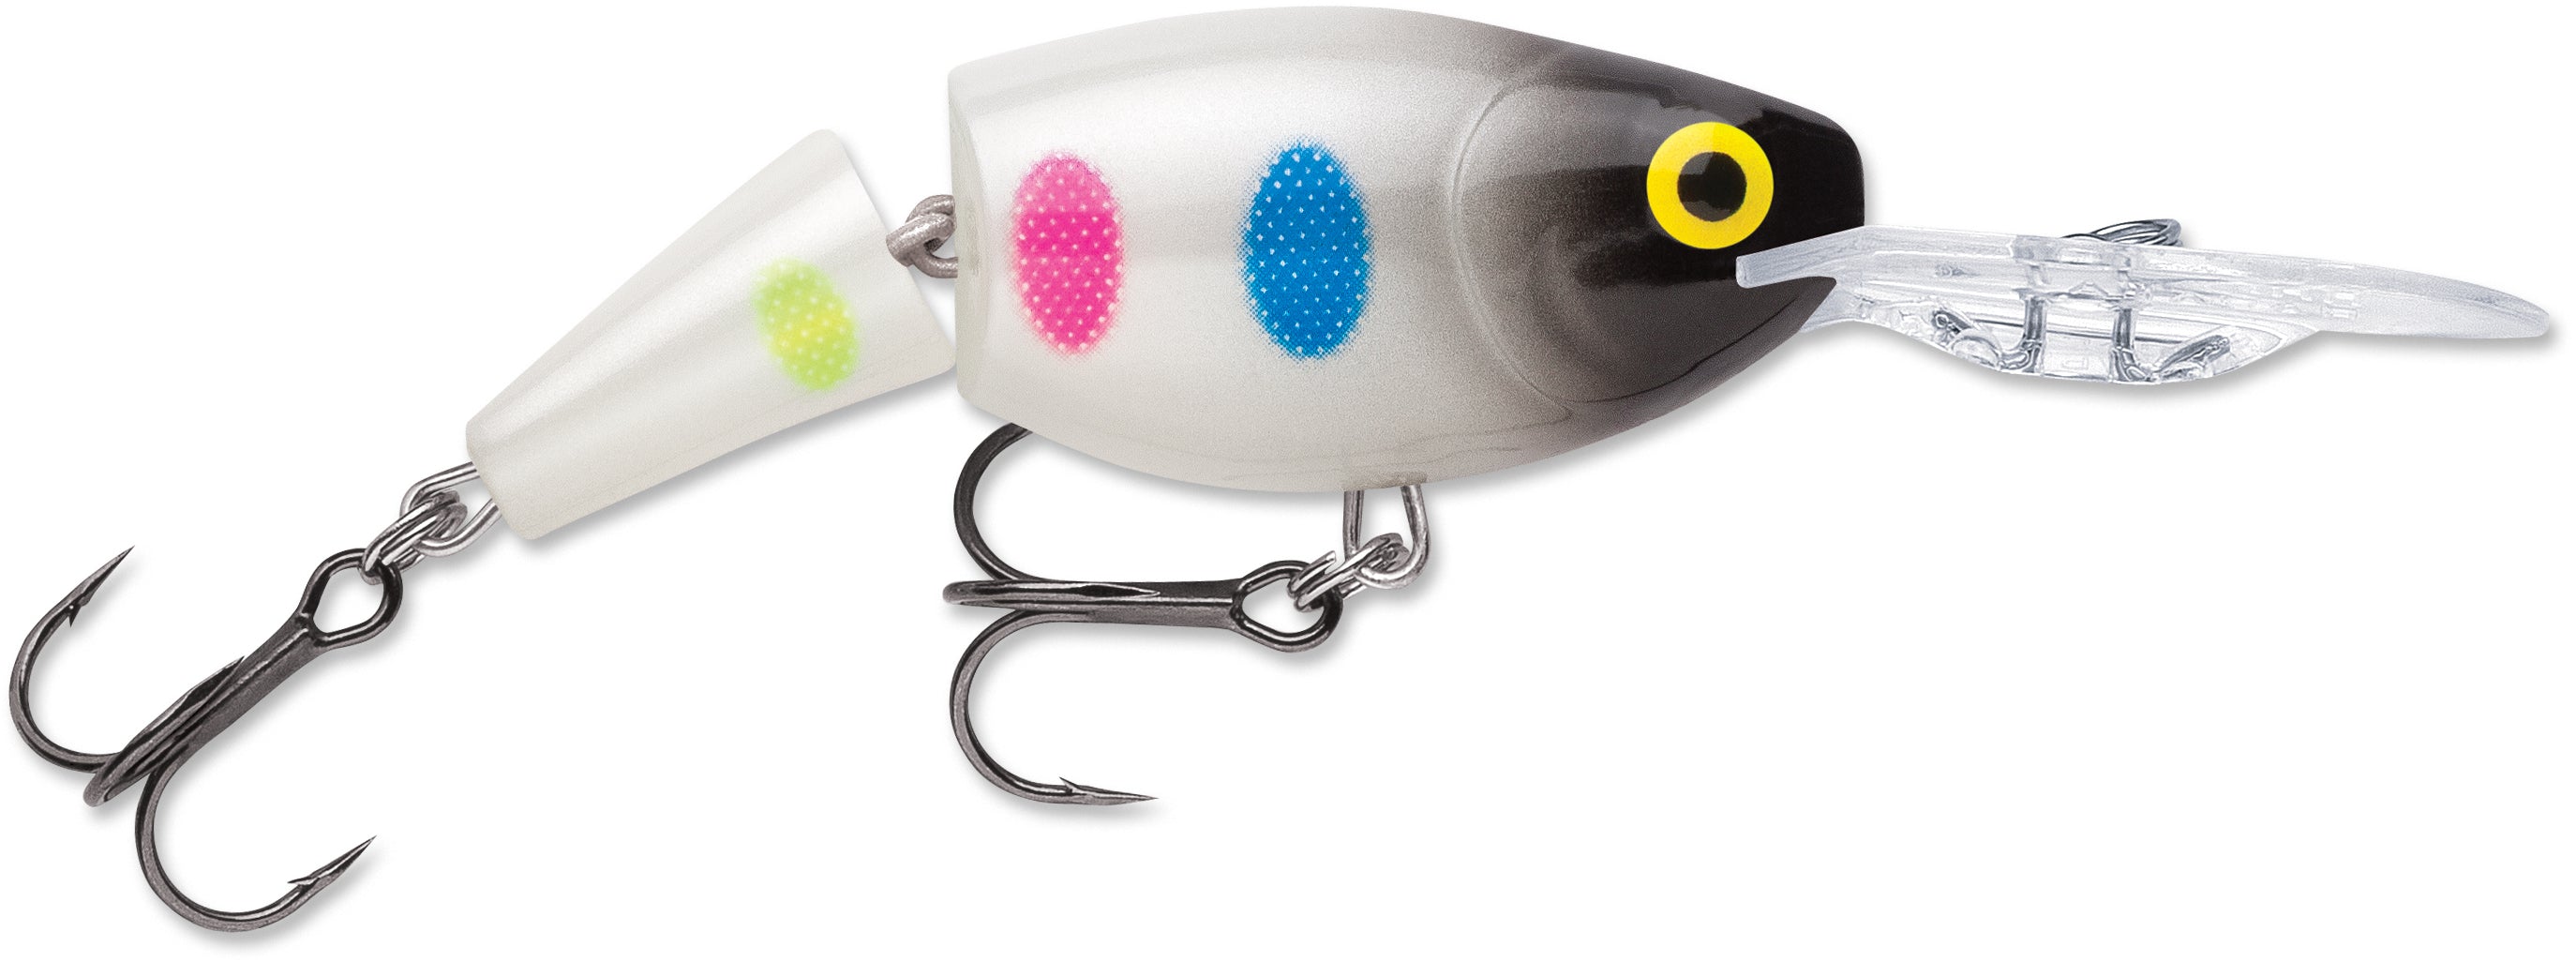 Rapala Jointed Hard Lure, Size: 7cm, 4g, Cabral Outdoors